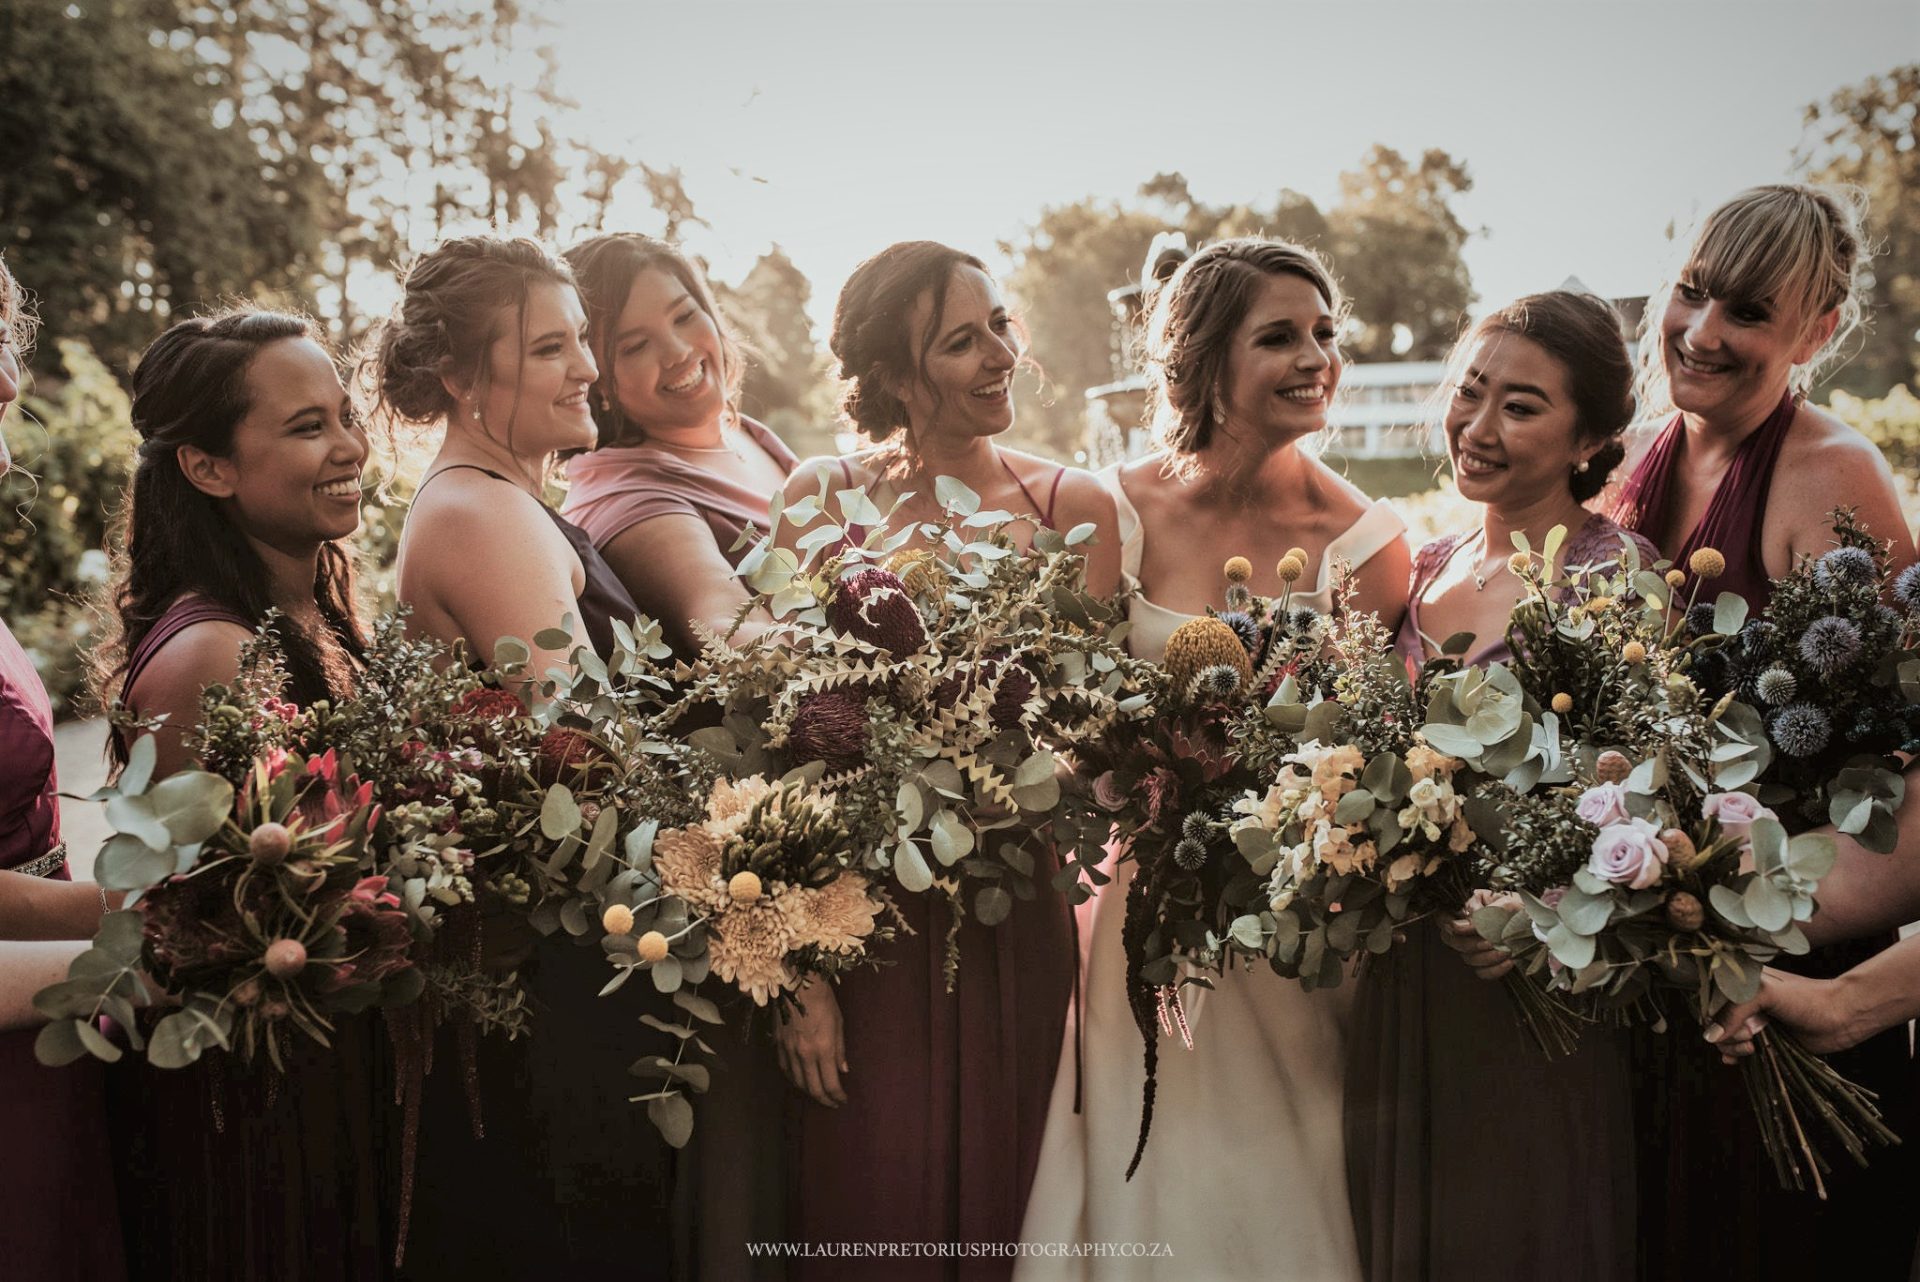 Beautiful Brides Bridesmaids And Bouquets